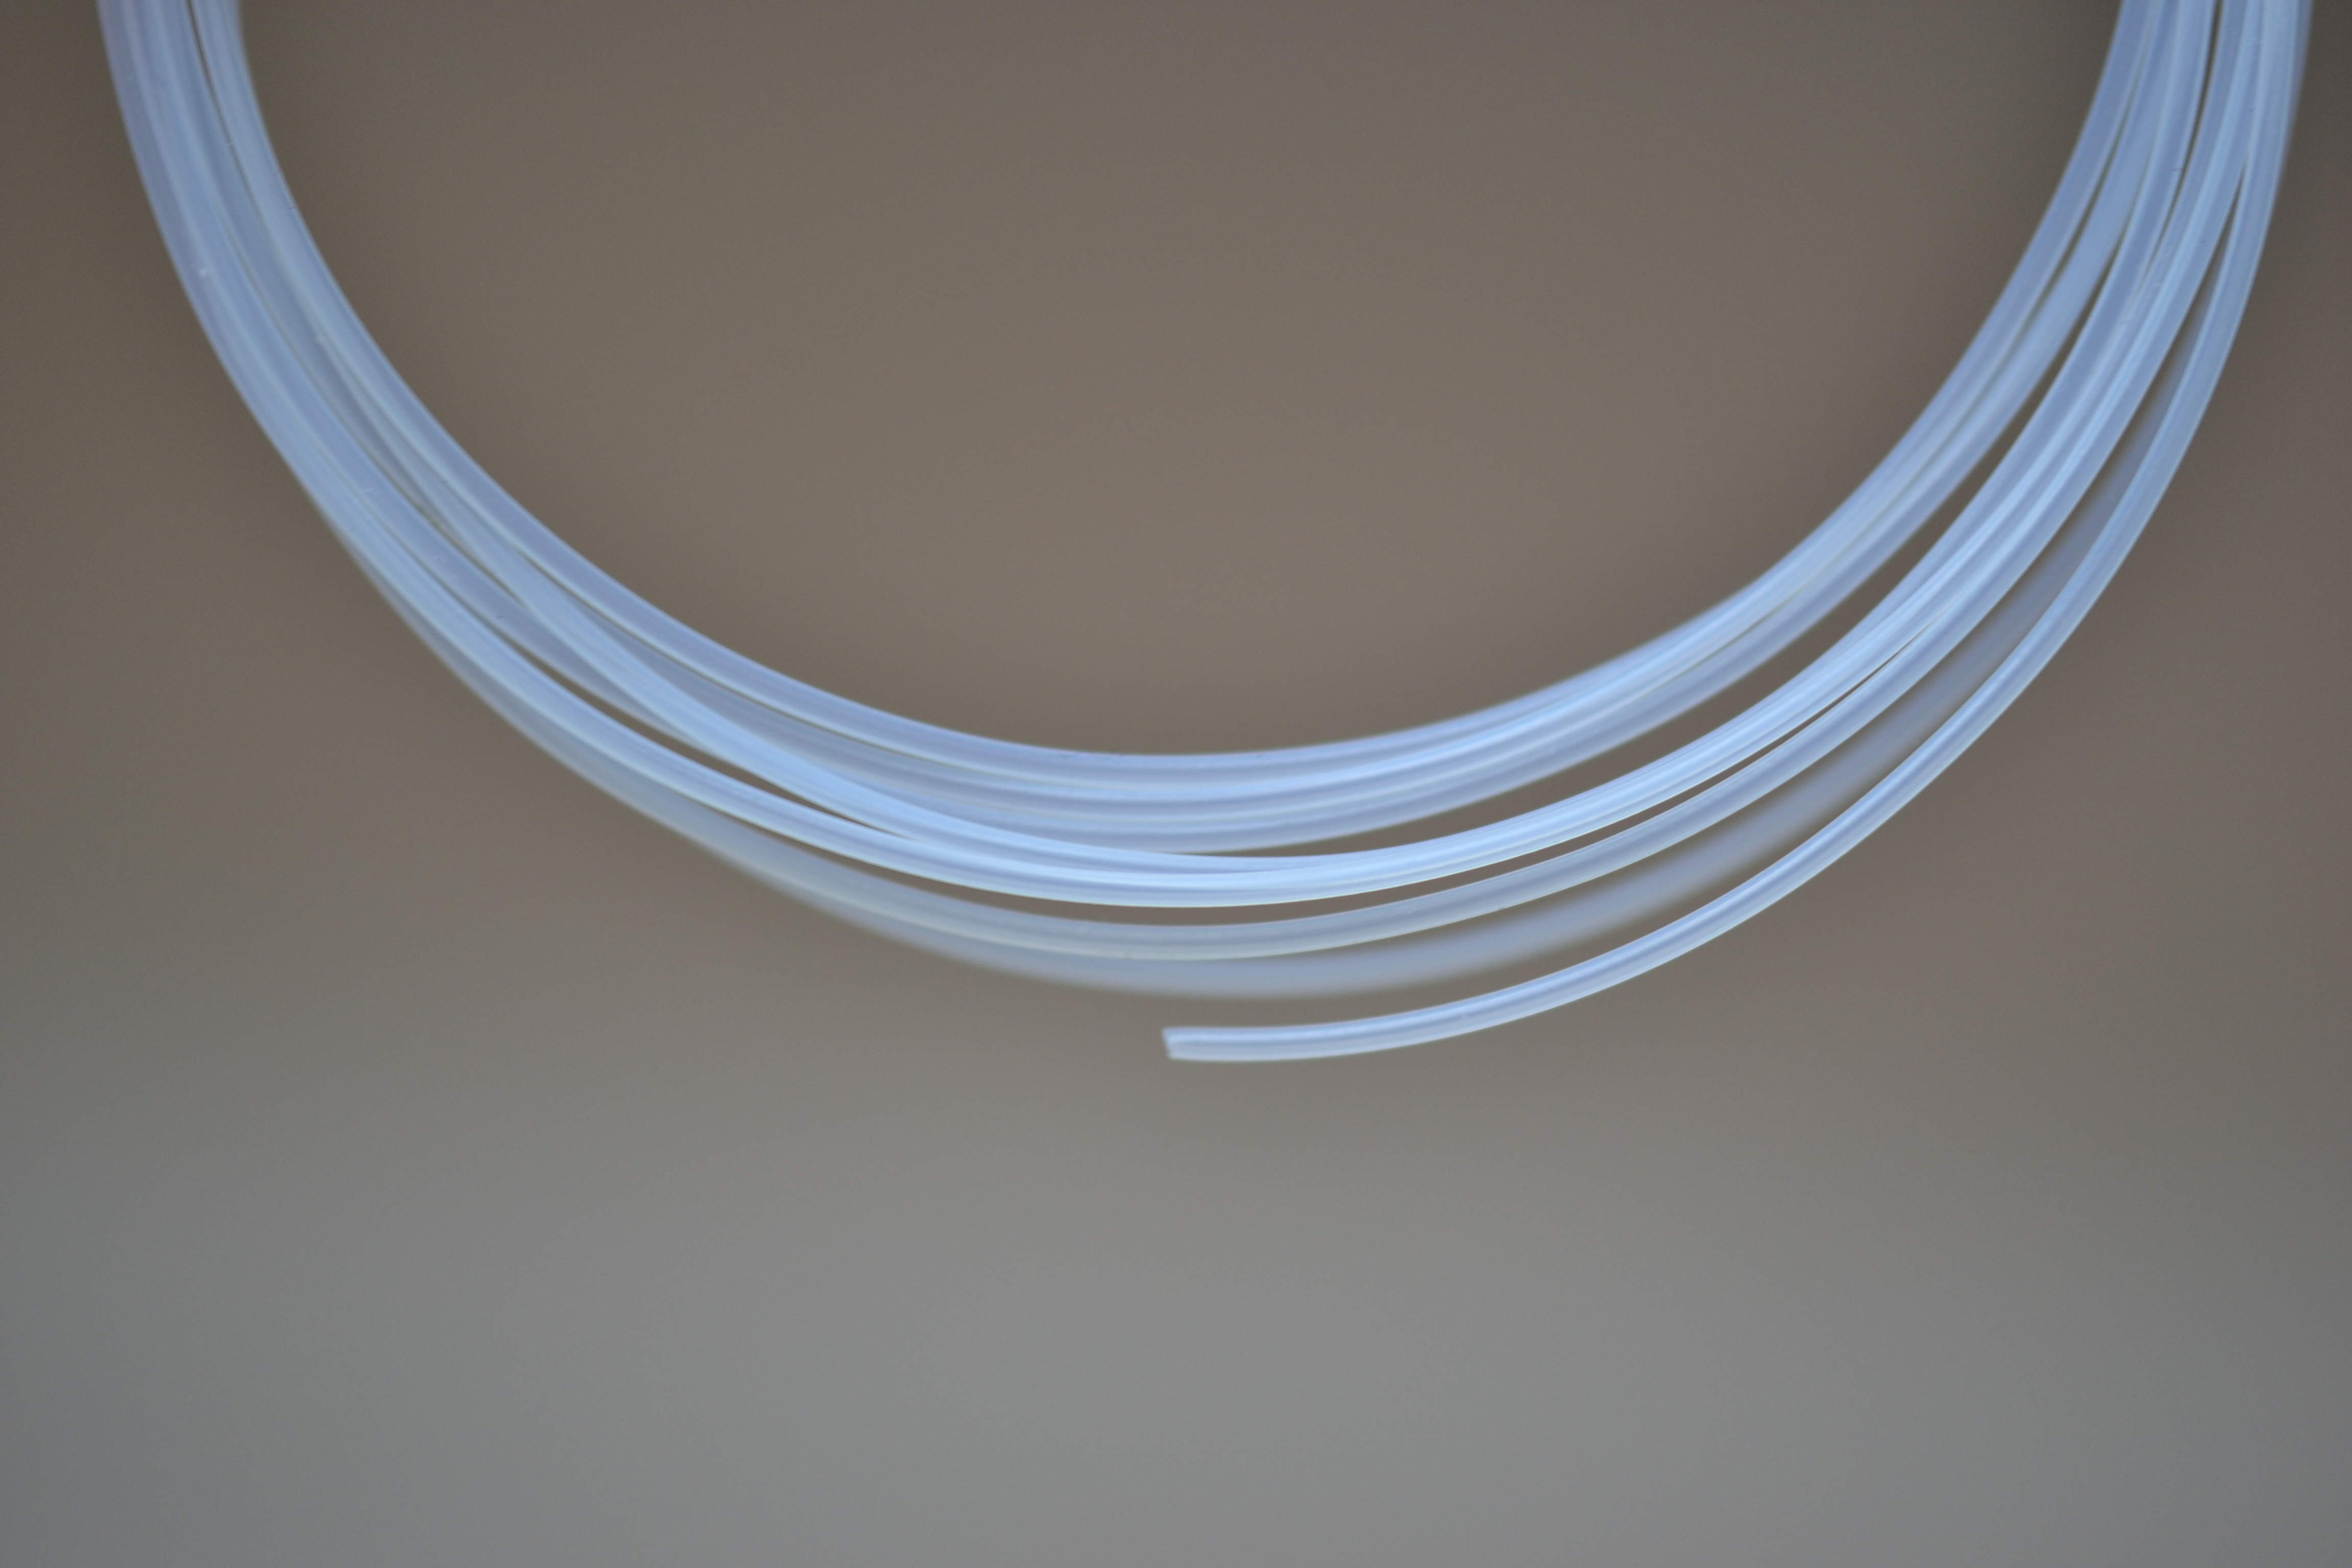 Transparent 20' Length Fluorotherm Polymers 5 mm ID x 6 mm OD Fluorostore F018123-20 Metric FEP Tubing 20 Length 